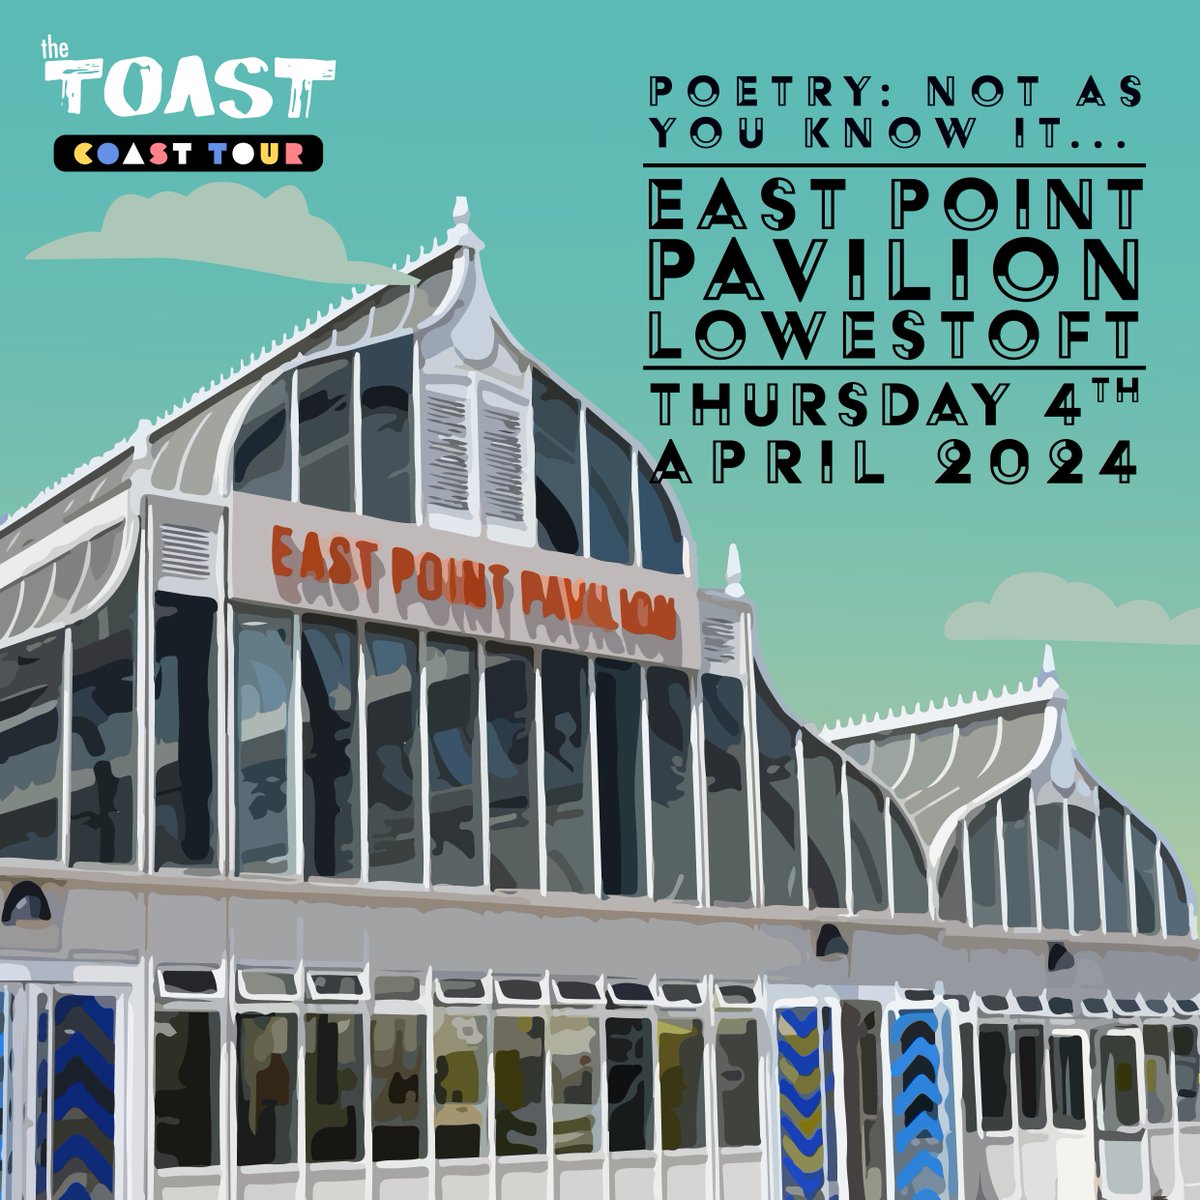 LOWESTOFT! TOAST is coming to your town with some incredible poets. We'd love to see you there. 4th Apr | East Point Pavilion | Pay What You Can Afford ticketsource.co.uk/first-light-fe…